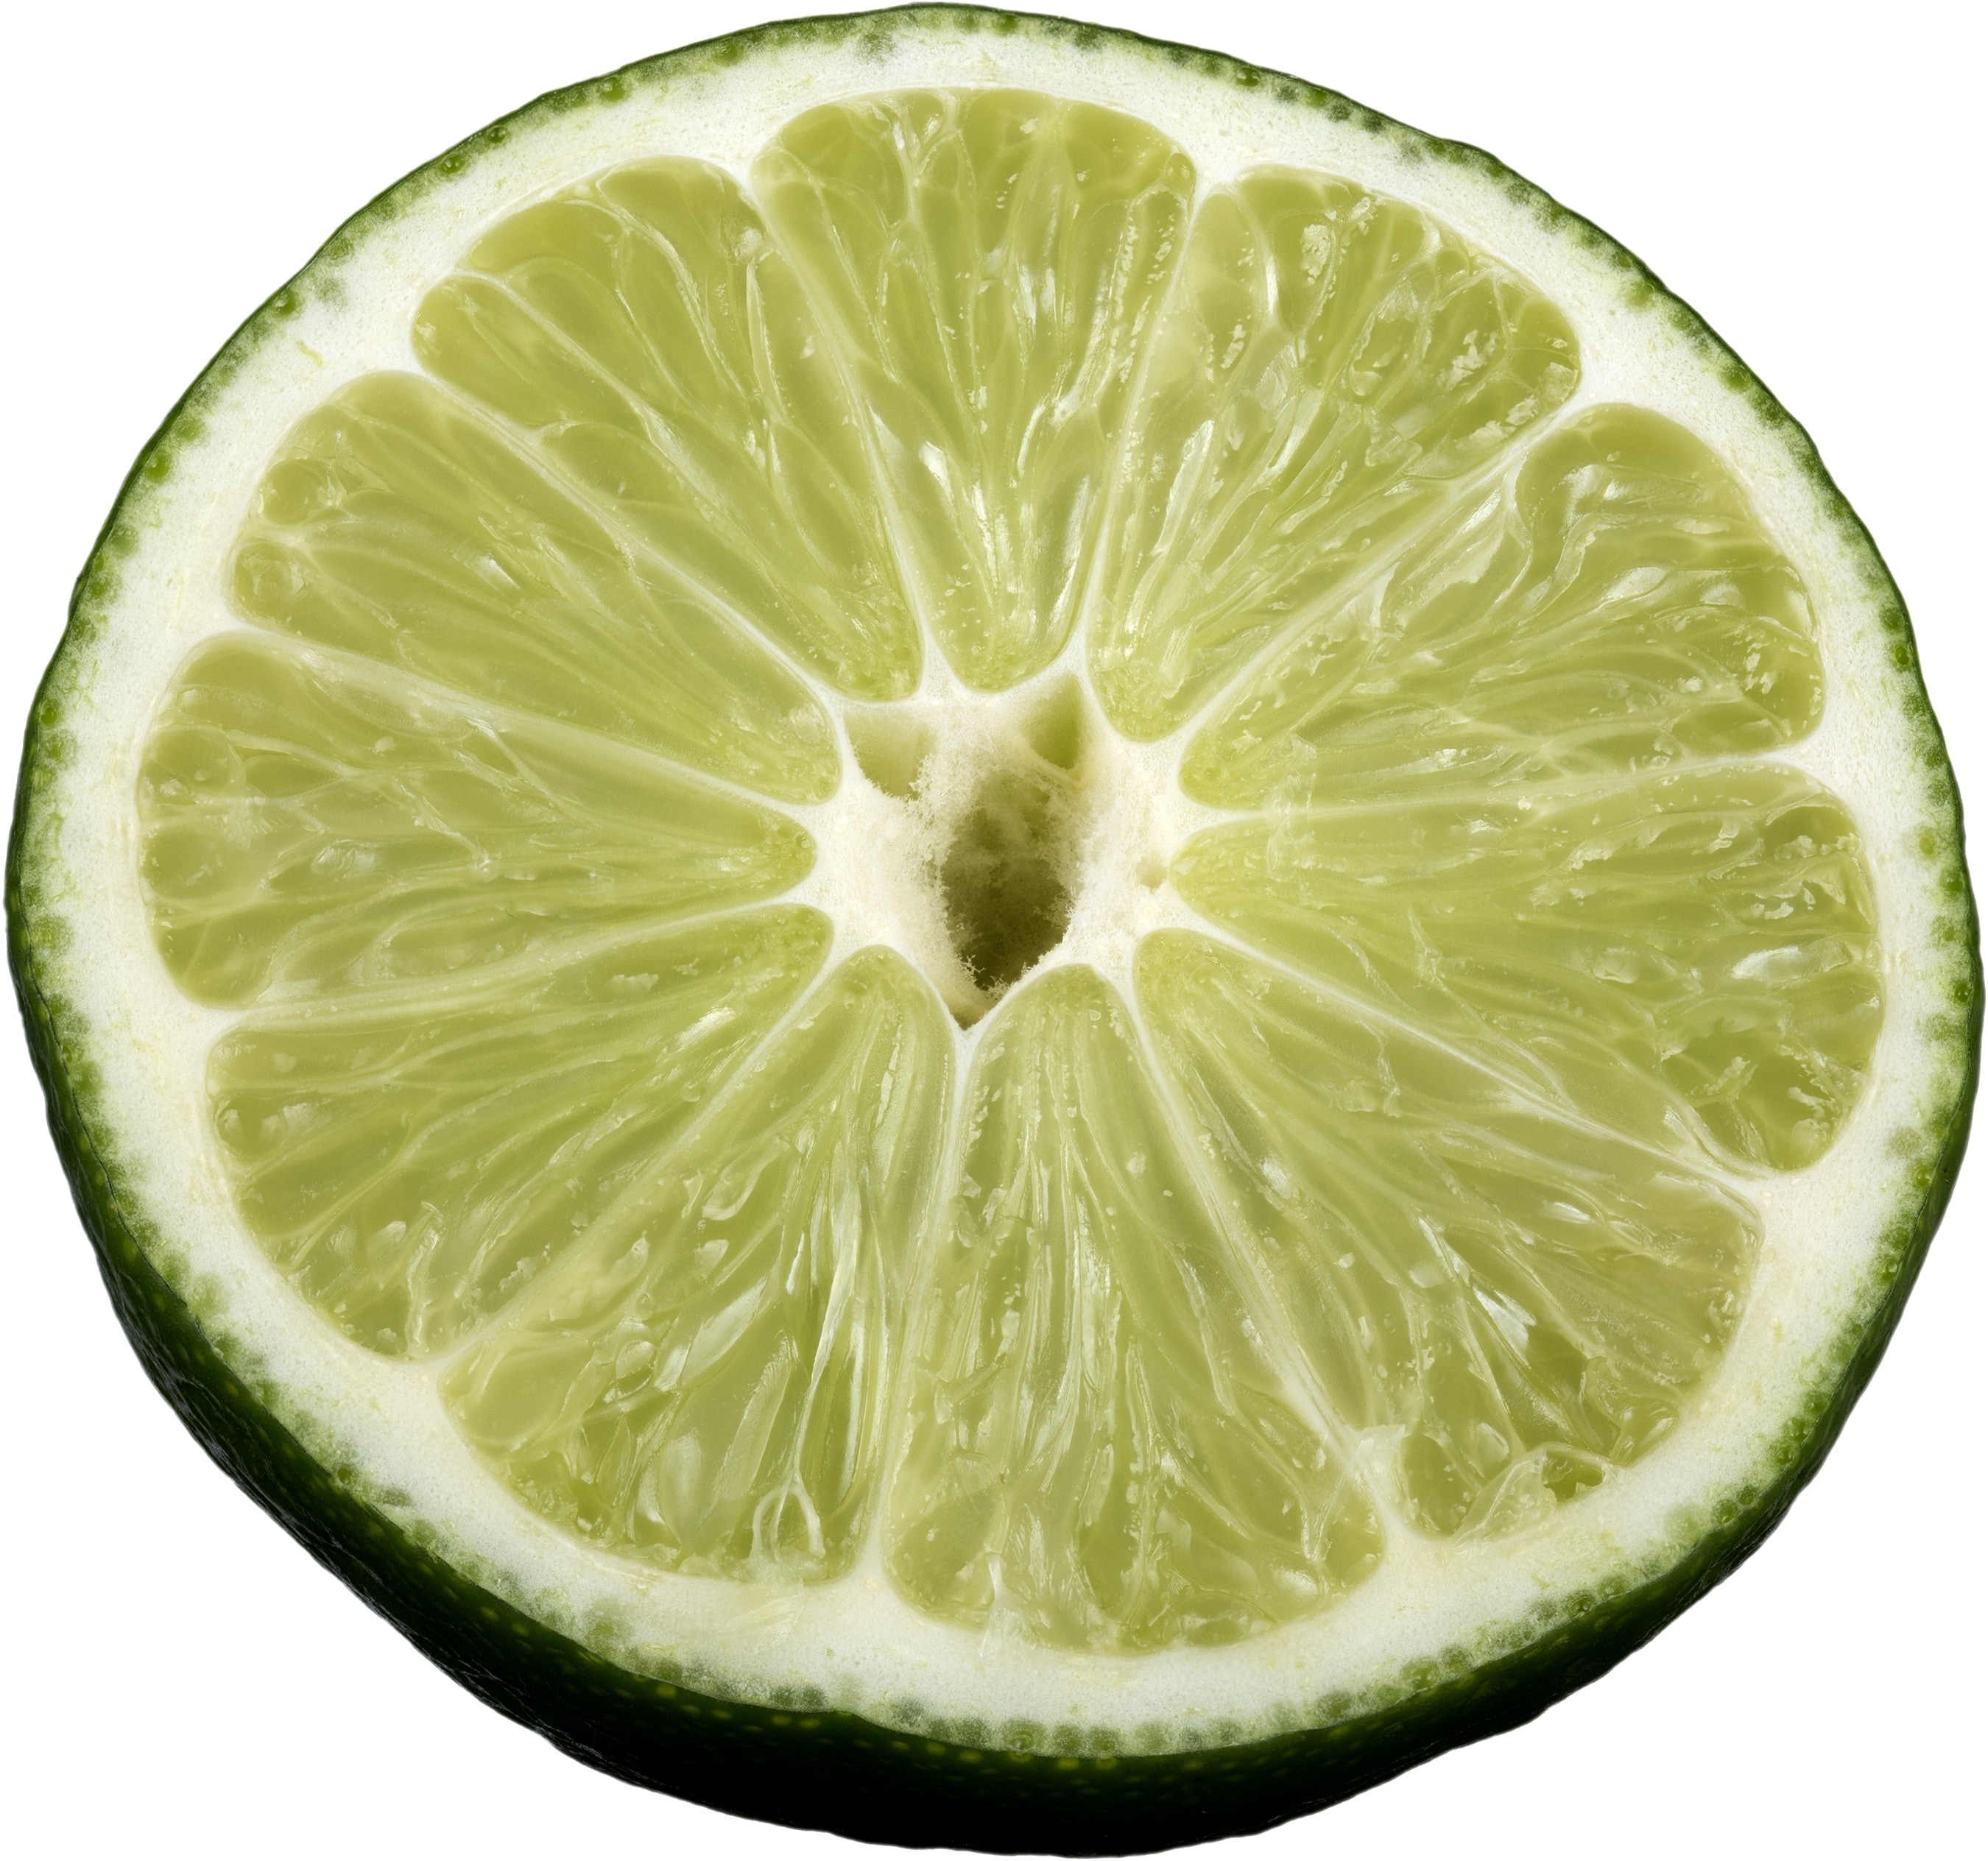 photo of sliced green lemon with white background